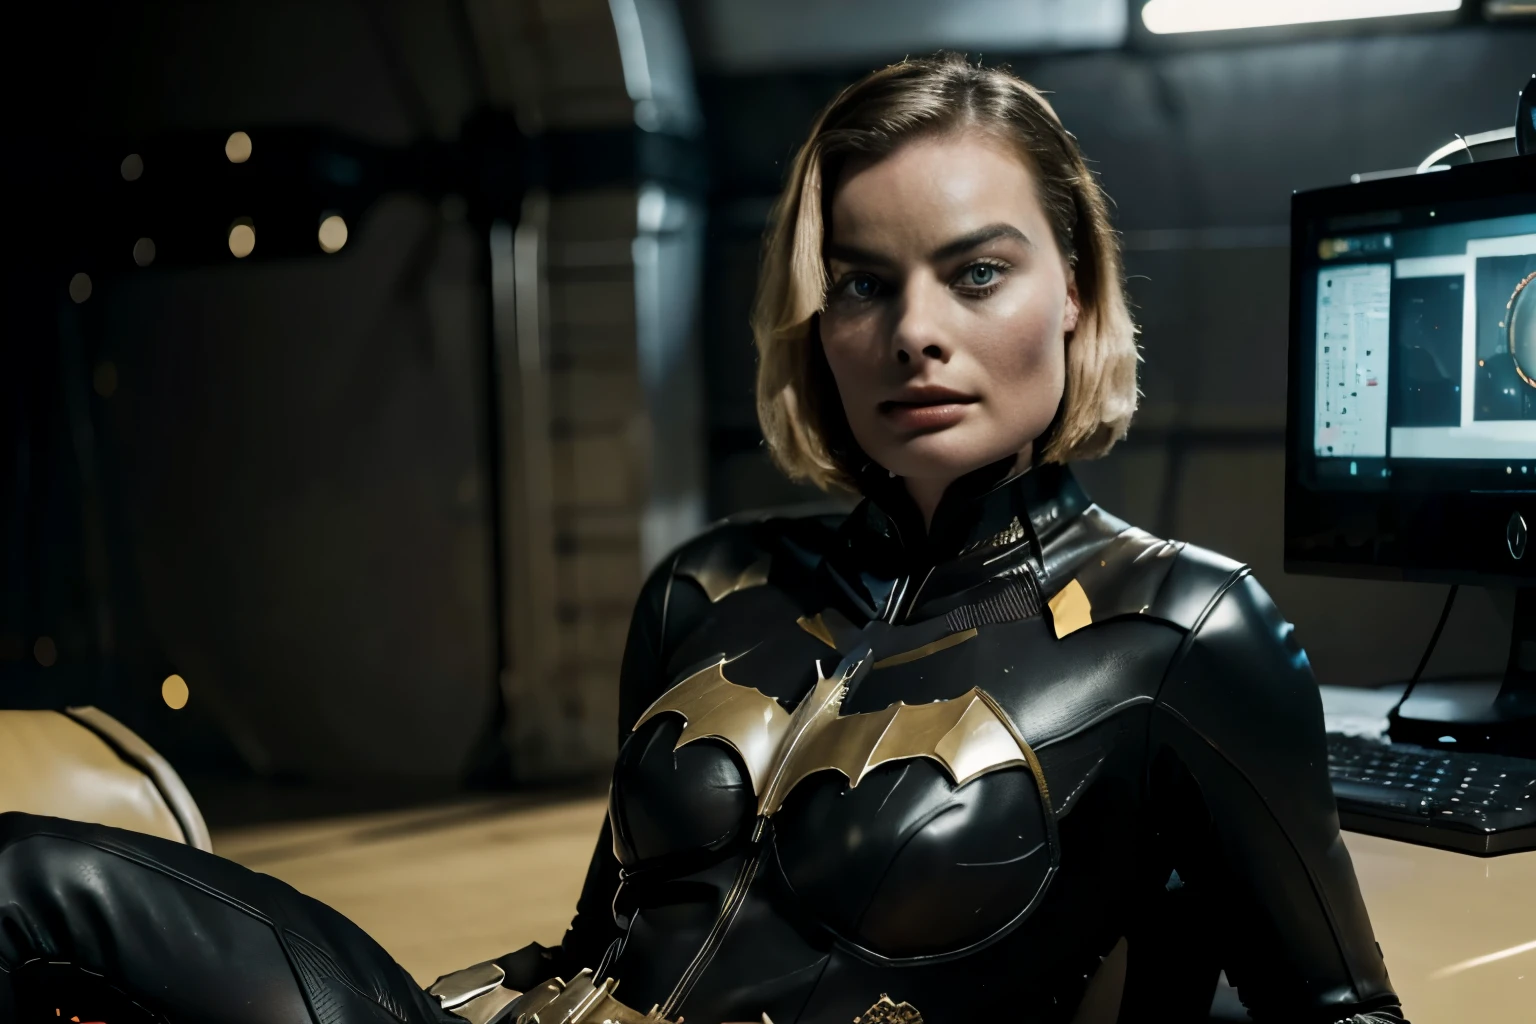 margot robbie, short blonde hair, batgirl suit, on the batcave, sitting on a chair front a computer, looking up, serious look, photorealistic portrait, dramatic, cinematic, overcast, high angle, 4k resoltion, hyperdetailed